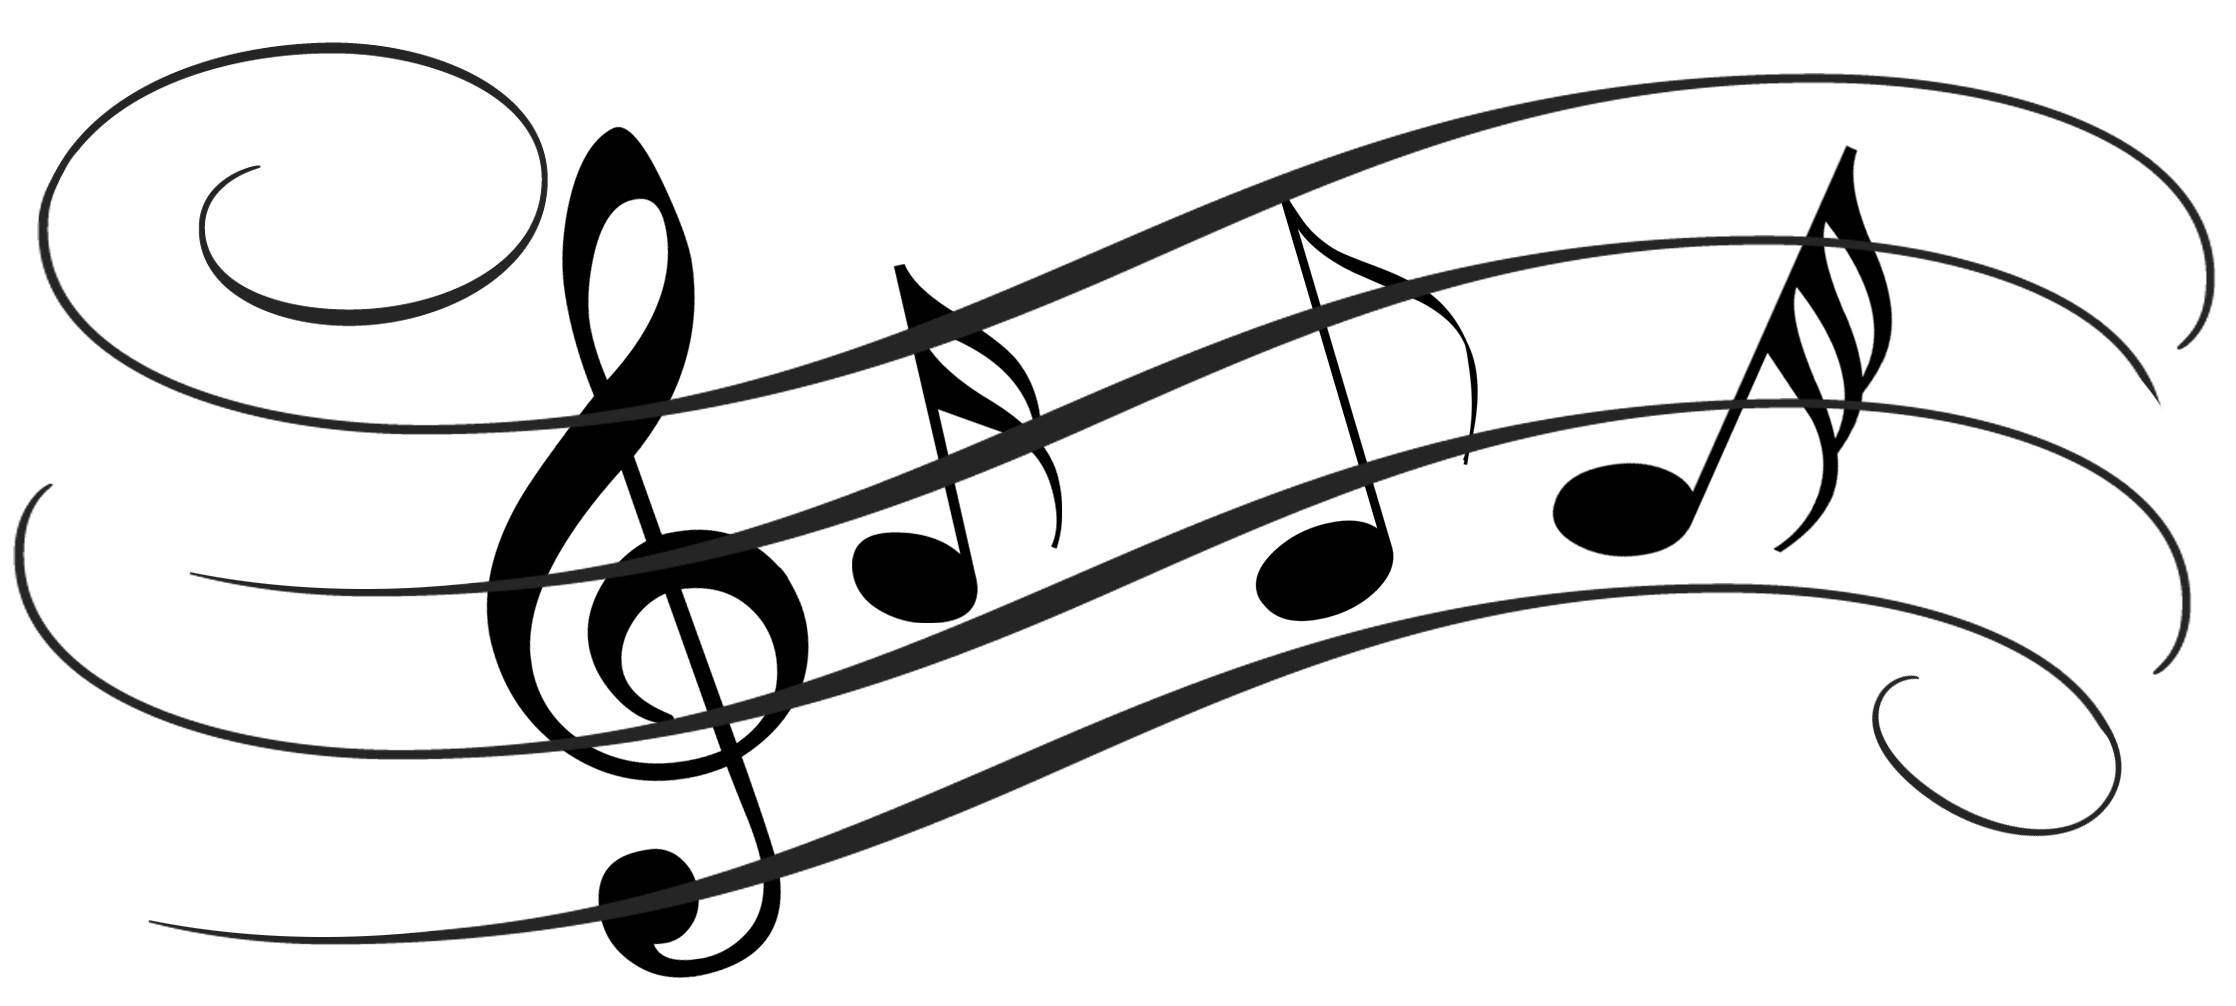 Musical notes music notes symbols clip art free clipart images 2